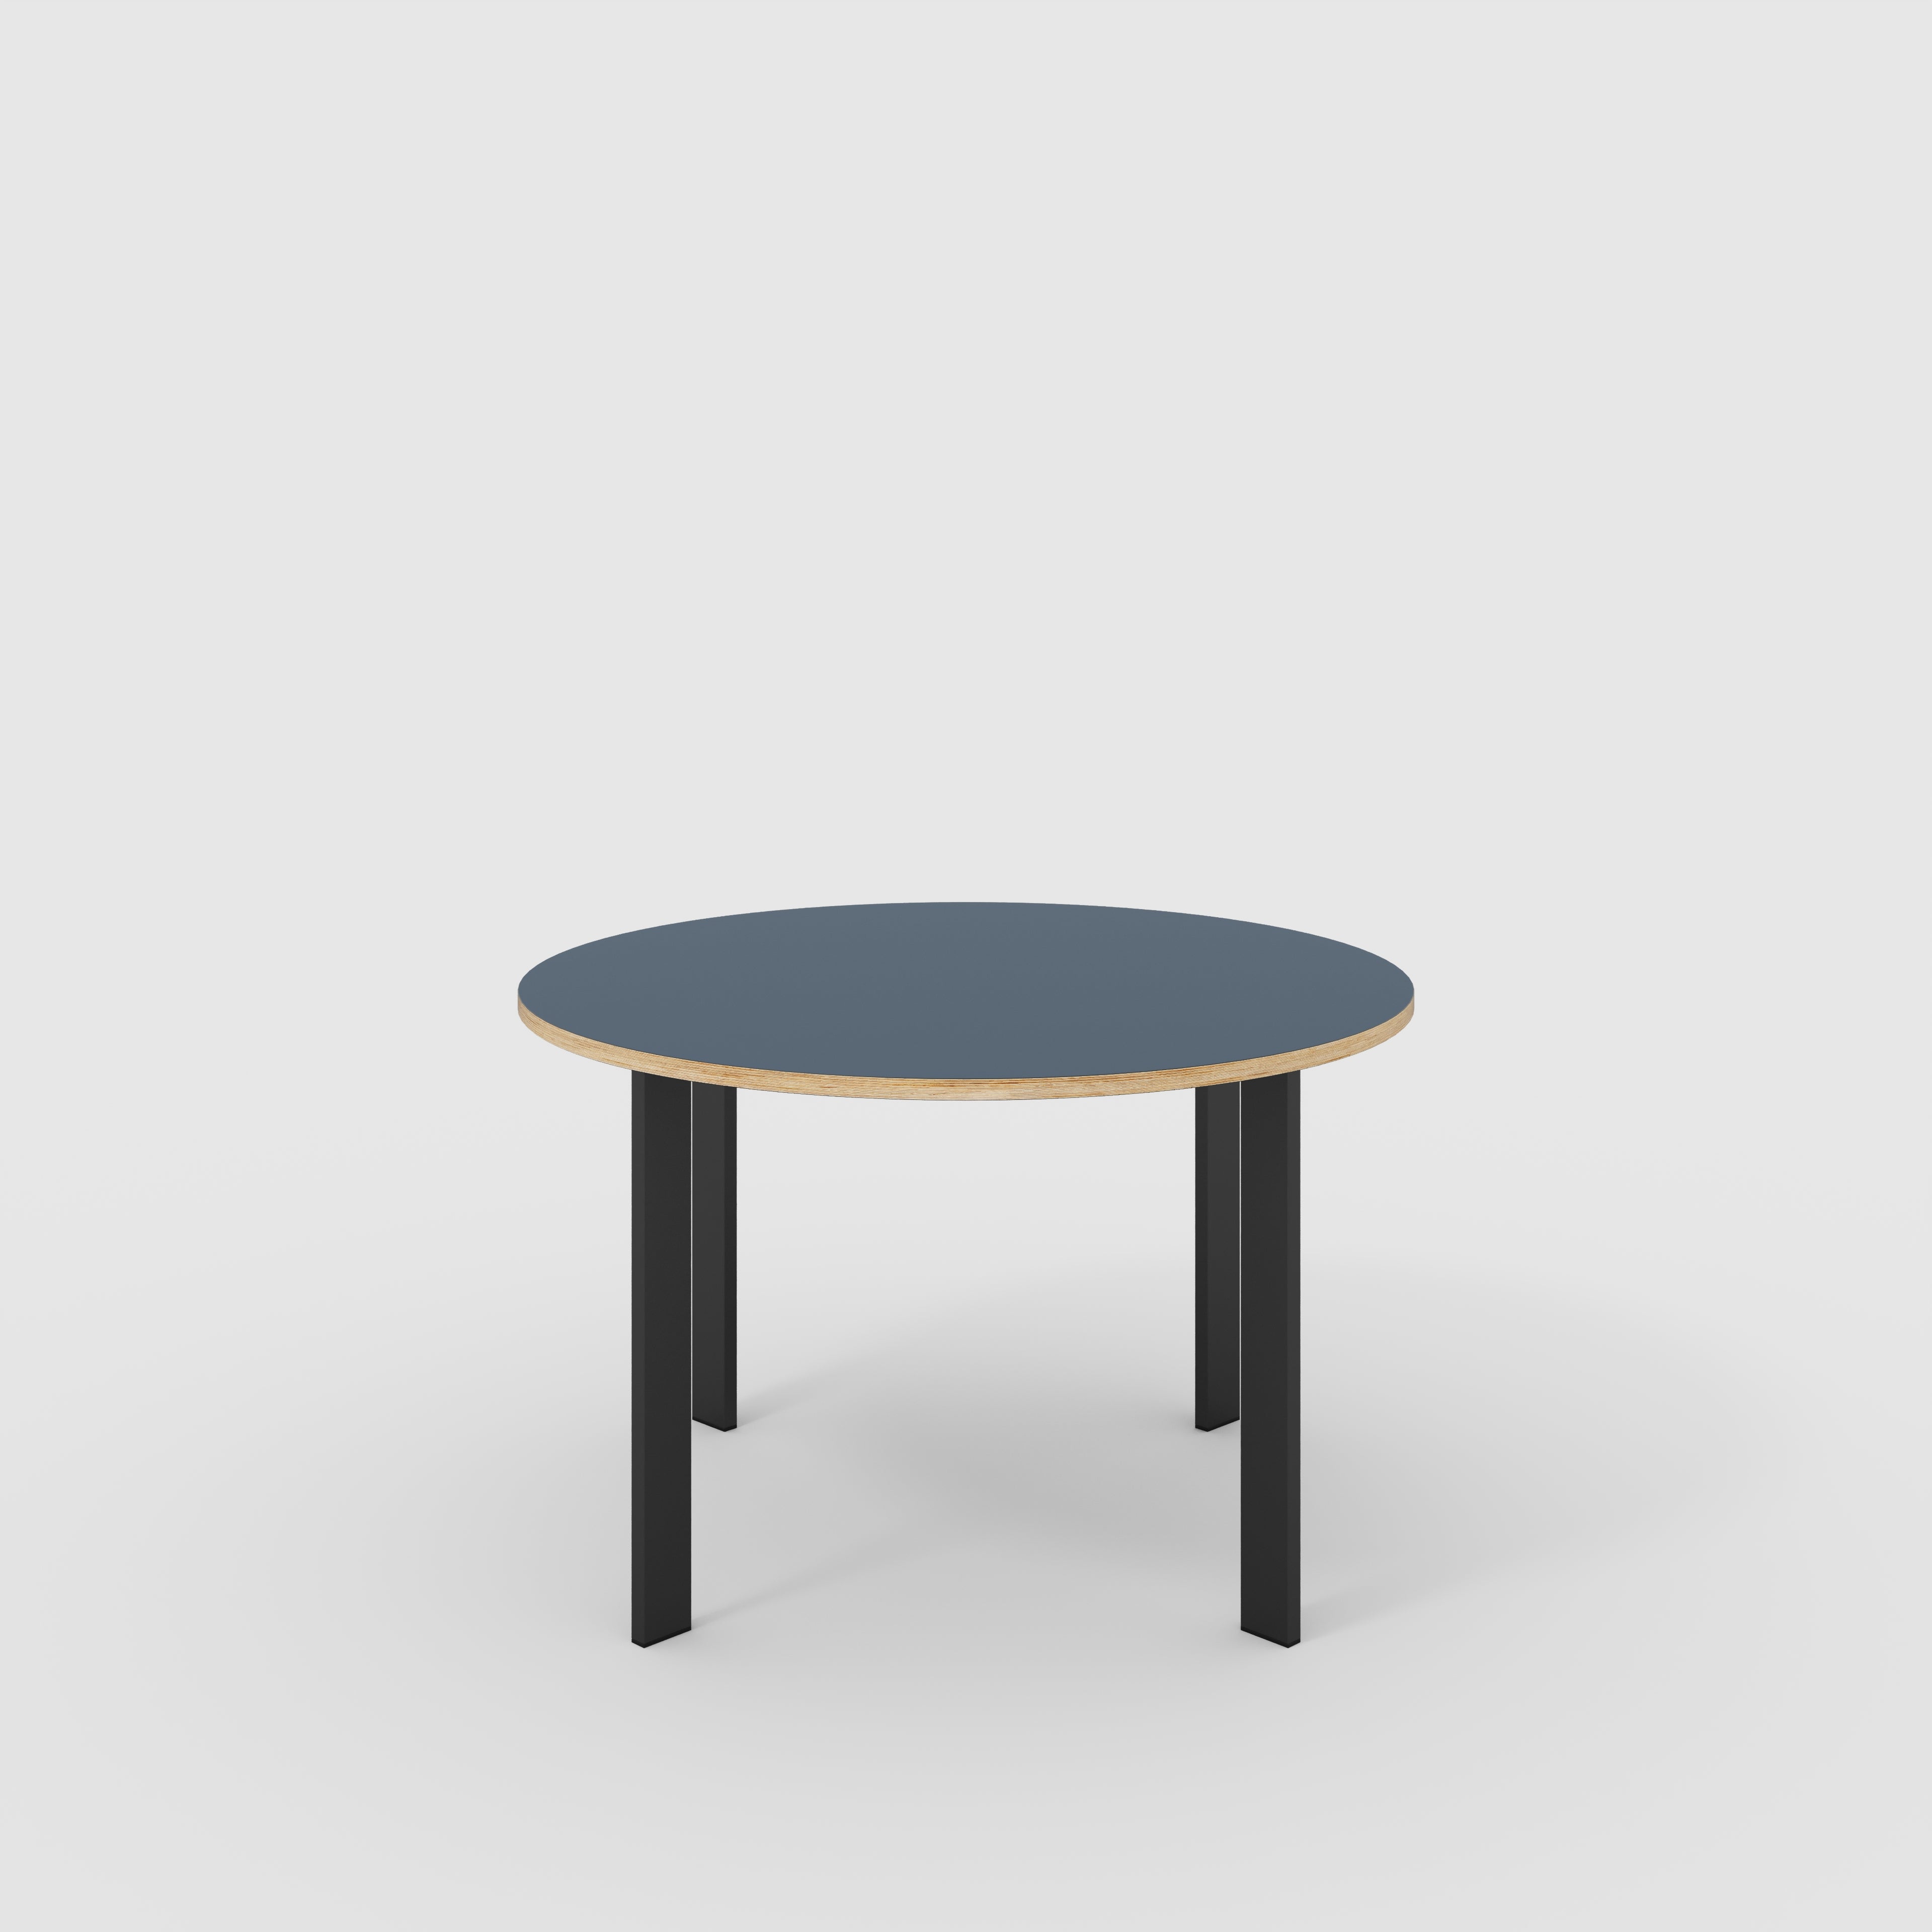 Round Table with Black Rectangular Single Pin Legs - Formica Night Sea Blue - 1200(dia) x 750(h)